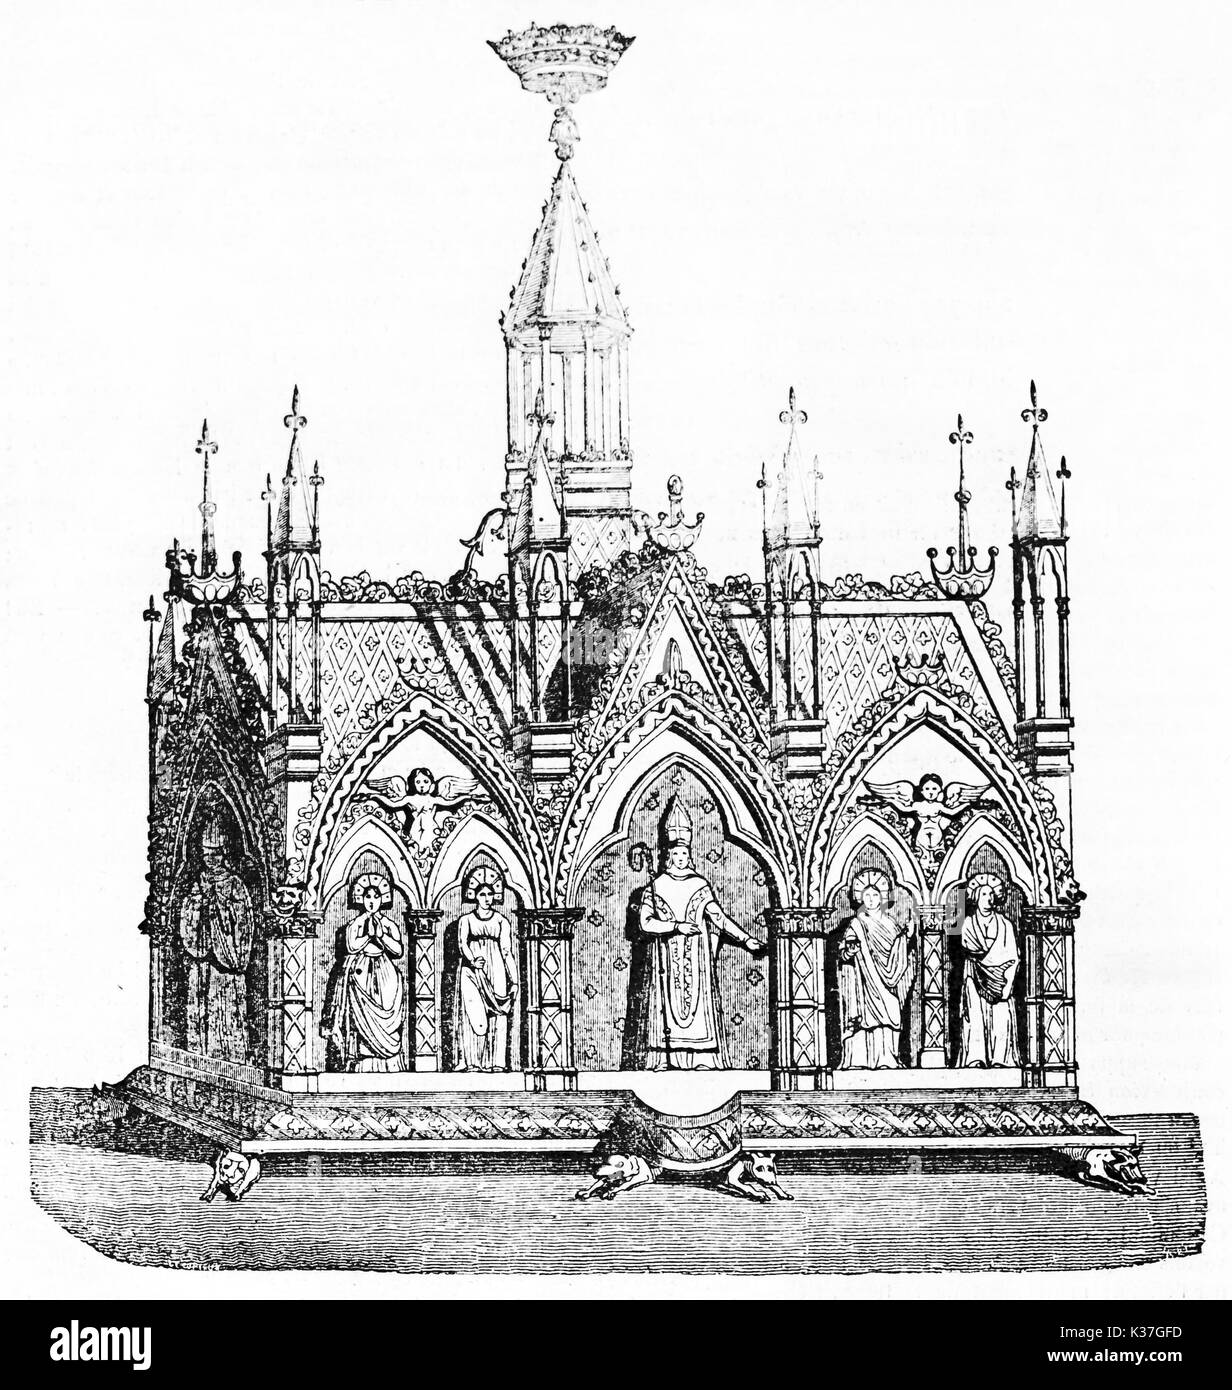 Golden reliquary (which no longer exist because it was merged) in Saint-Spire church Corbeil France. Old Illustration by Lecurieux Andrew Best and Leloir published on Magasin Pittoresque Paris 1834 Stock Photo